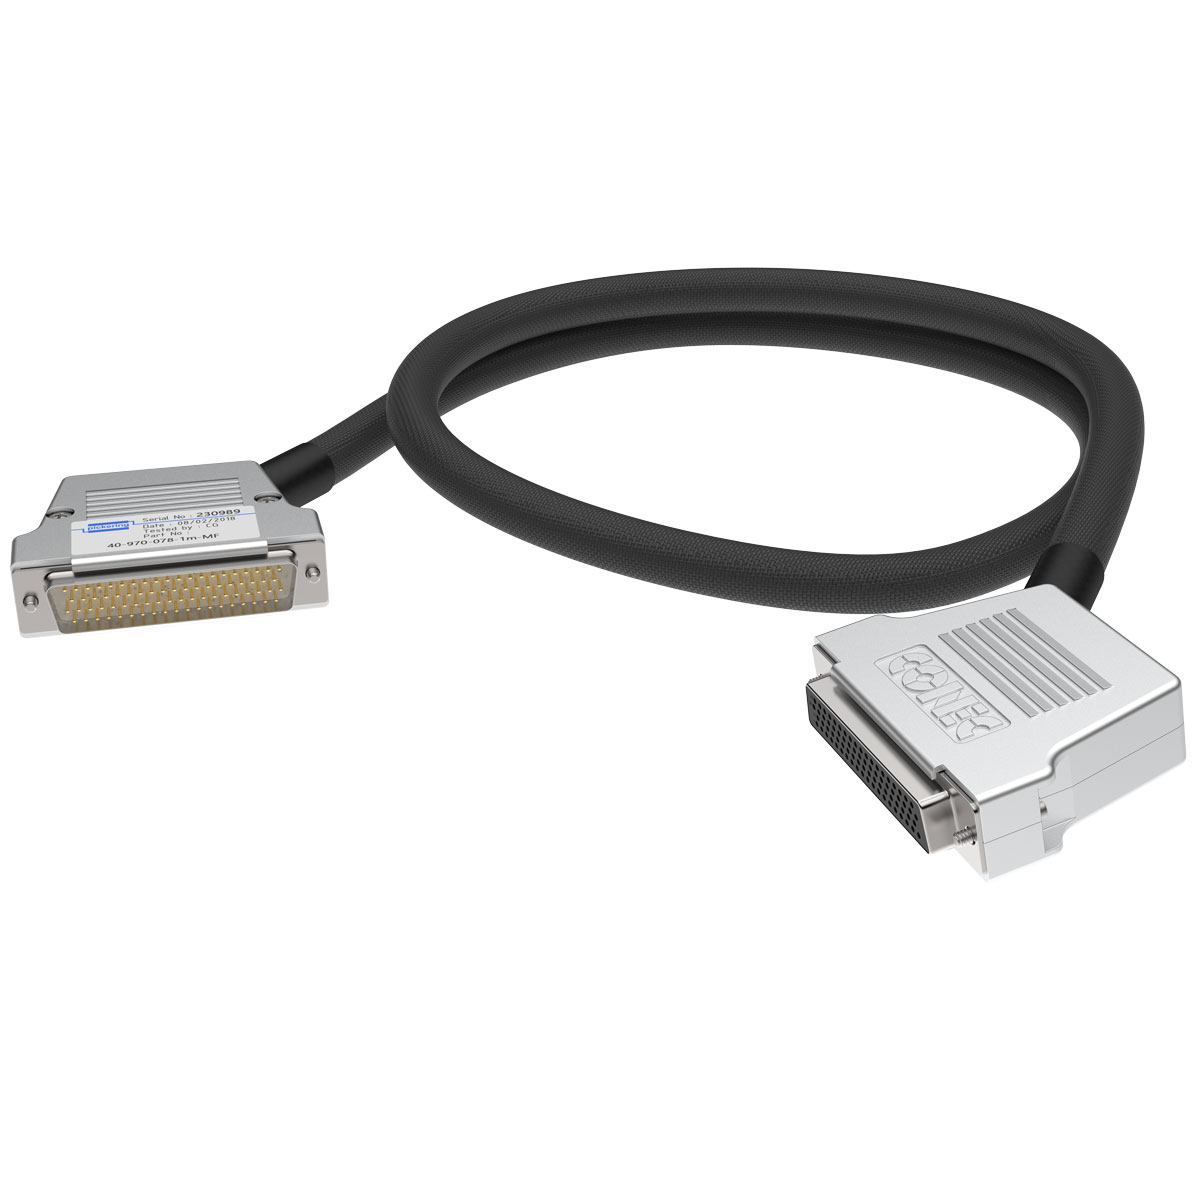 78-pin D-type cable for differential signals